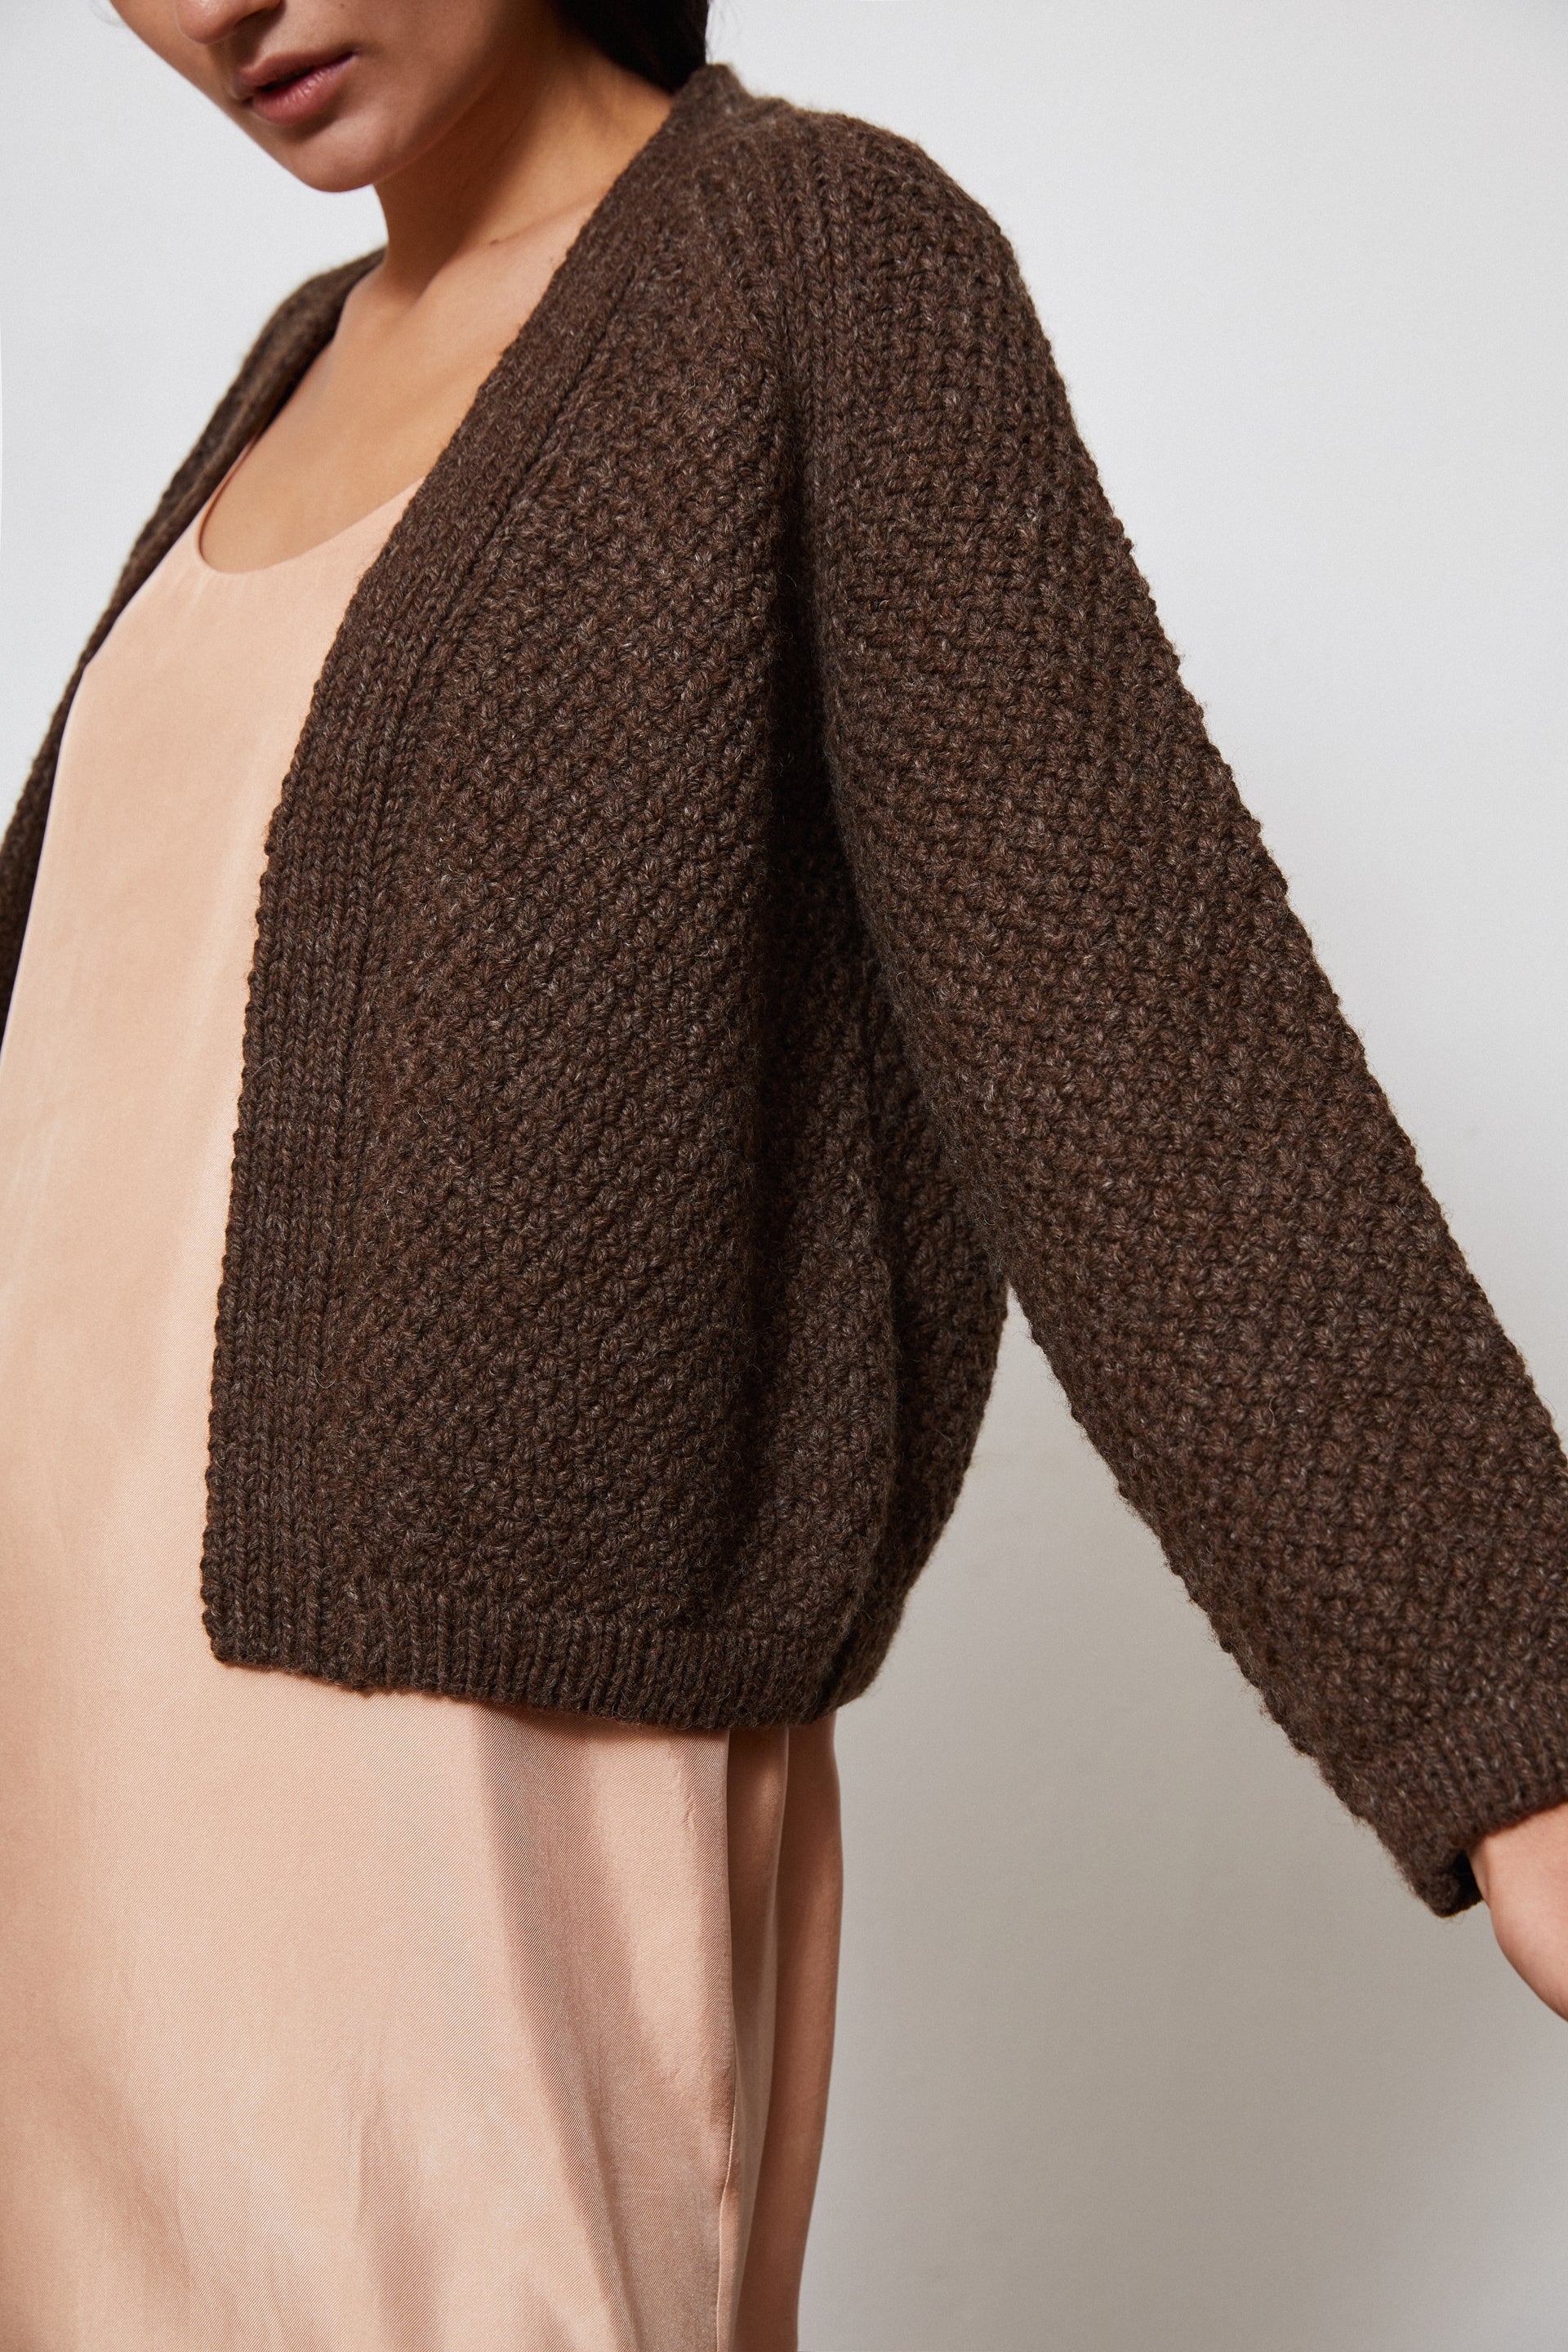 UNDYED, WOOL, HAND-KNITTED, CARDIGAN, STYLISH, SUSTAINABLE, HAND-CRAFTED, WOMENSWEAR 